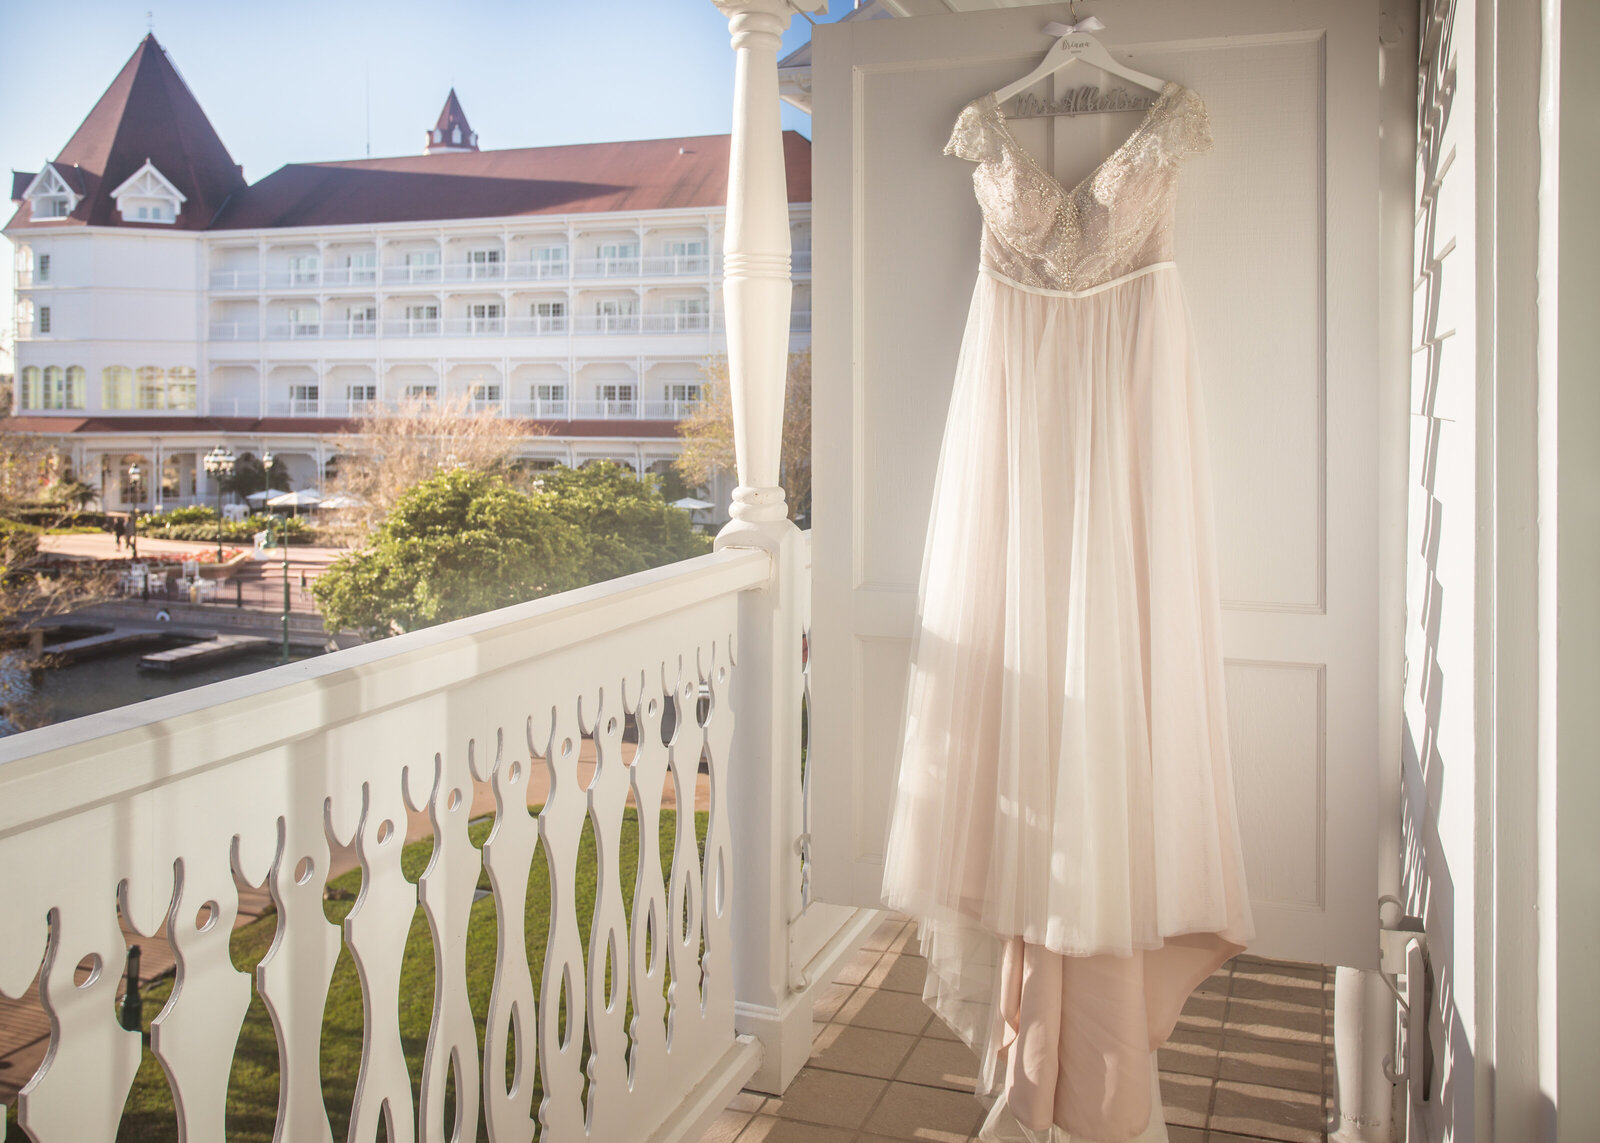 Dress hanging outside at the Grand Floridian at the Walt Disney World Resort